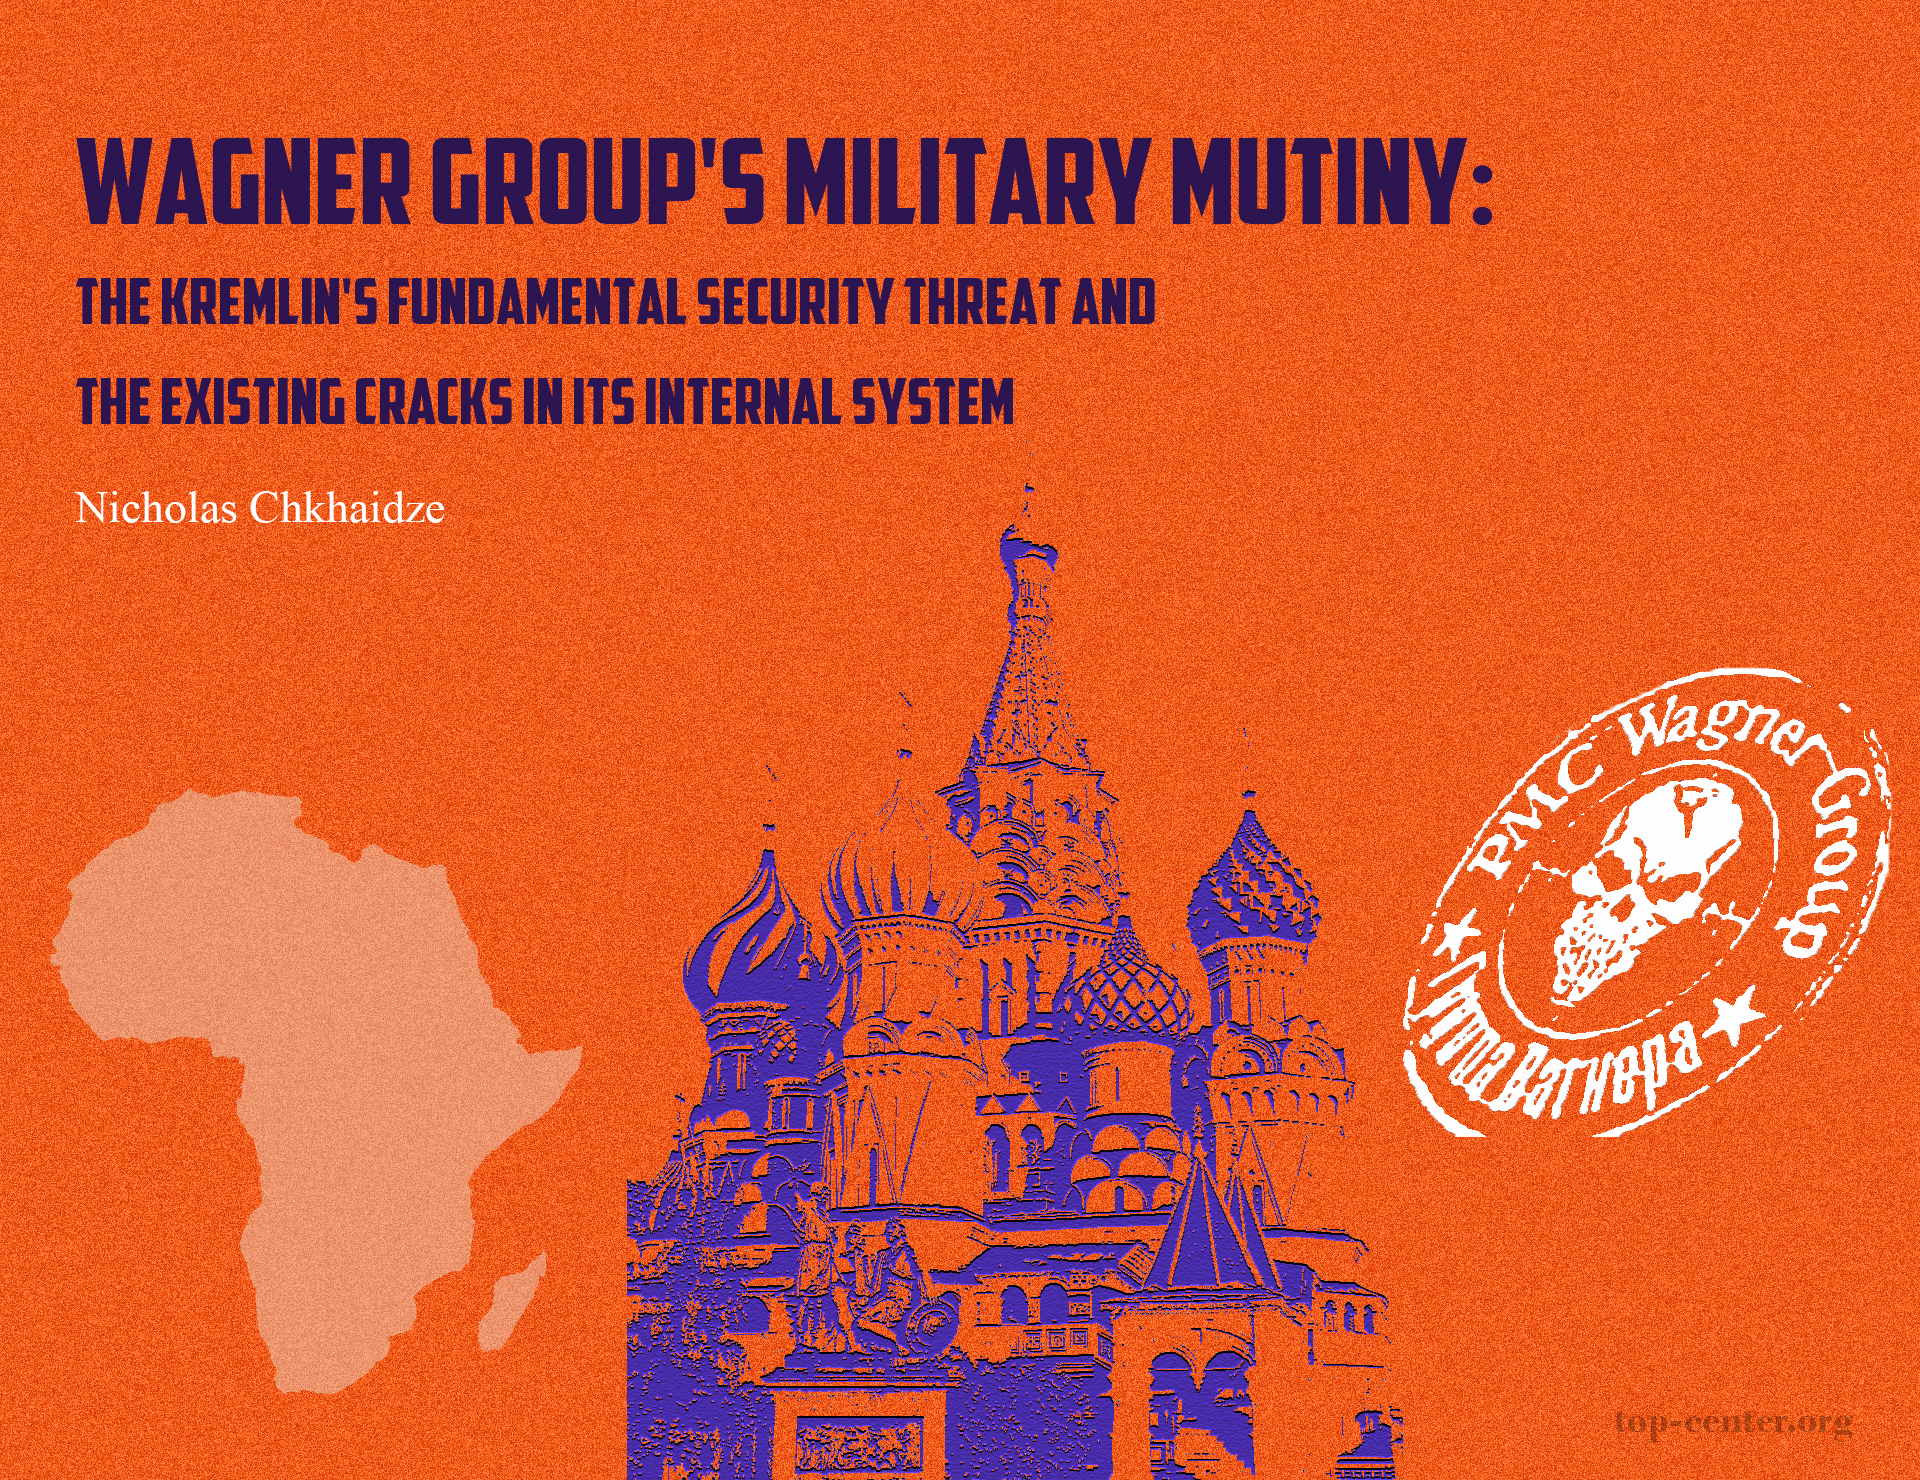 Wagner Group’s military mutiny: The Kremlin’s fundamental security threat and the existing cracks in its internal system